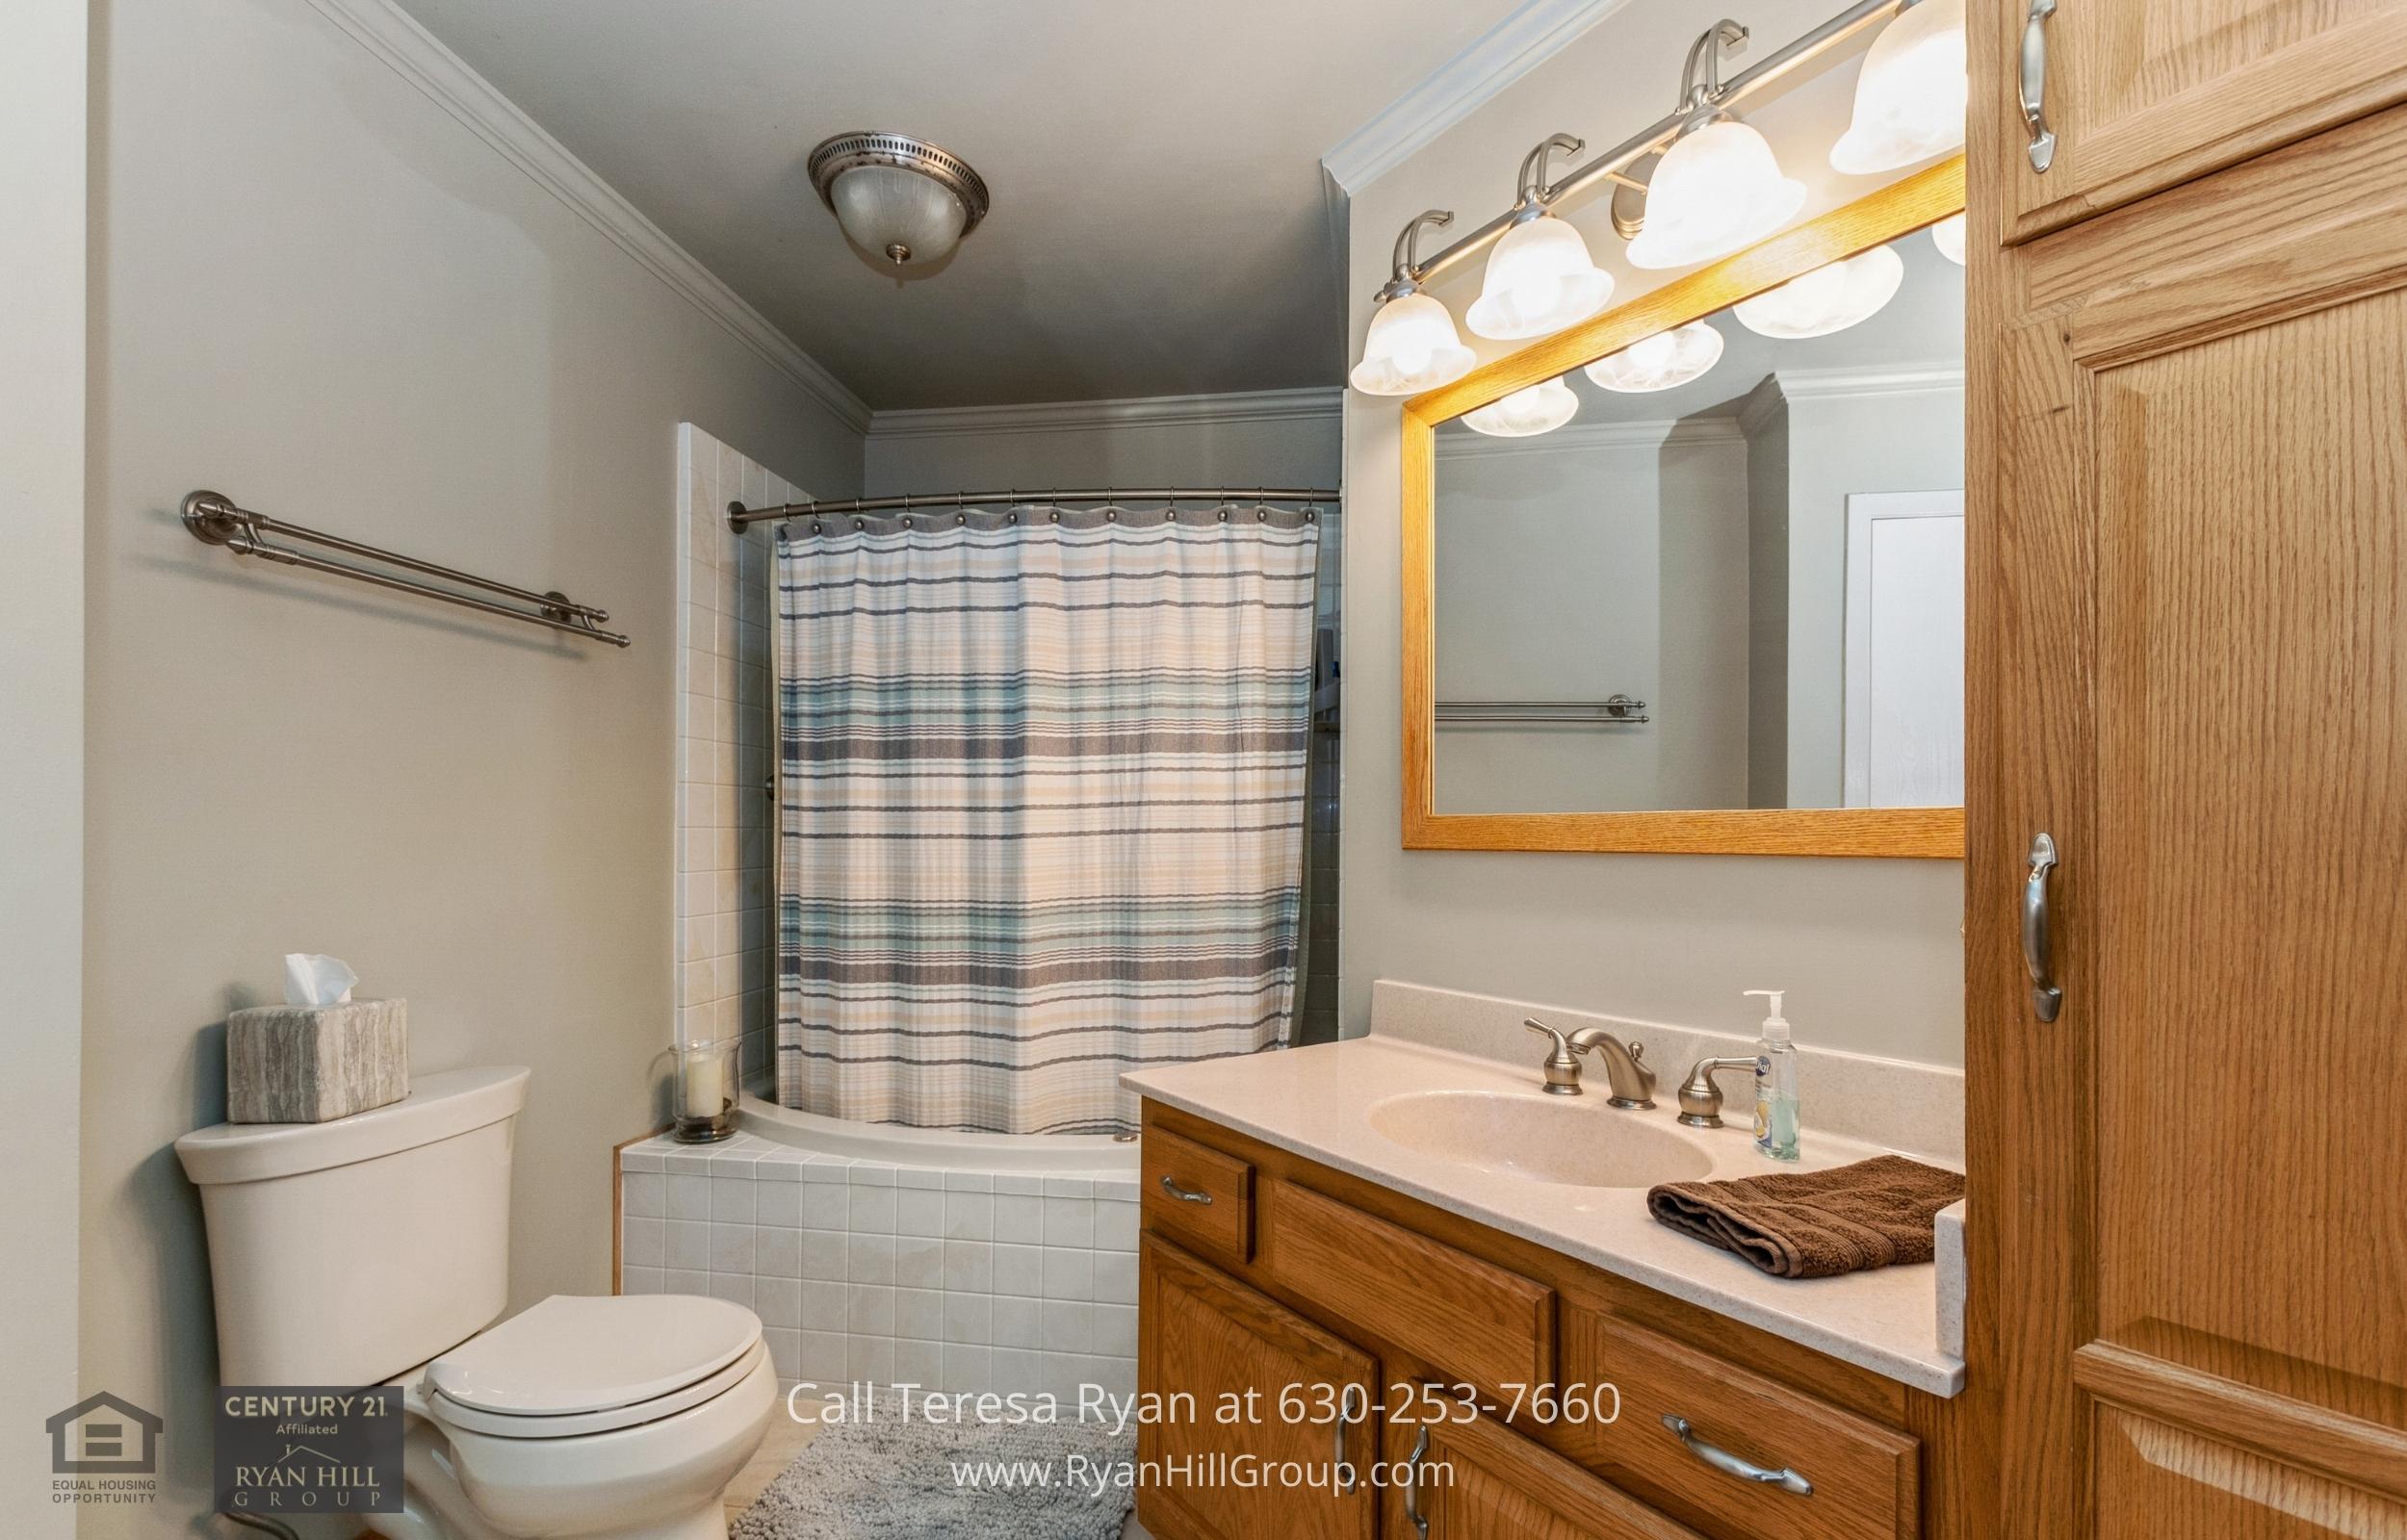 Soak away all your stress in a large oval jetted soaking tub in this Frankfort, IL home's master bathroom.